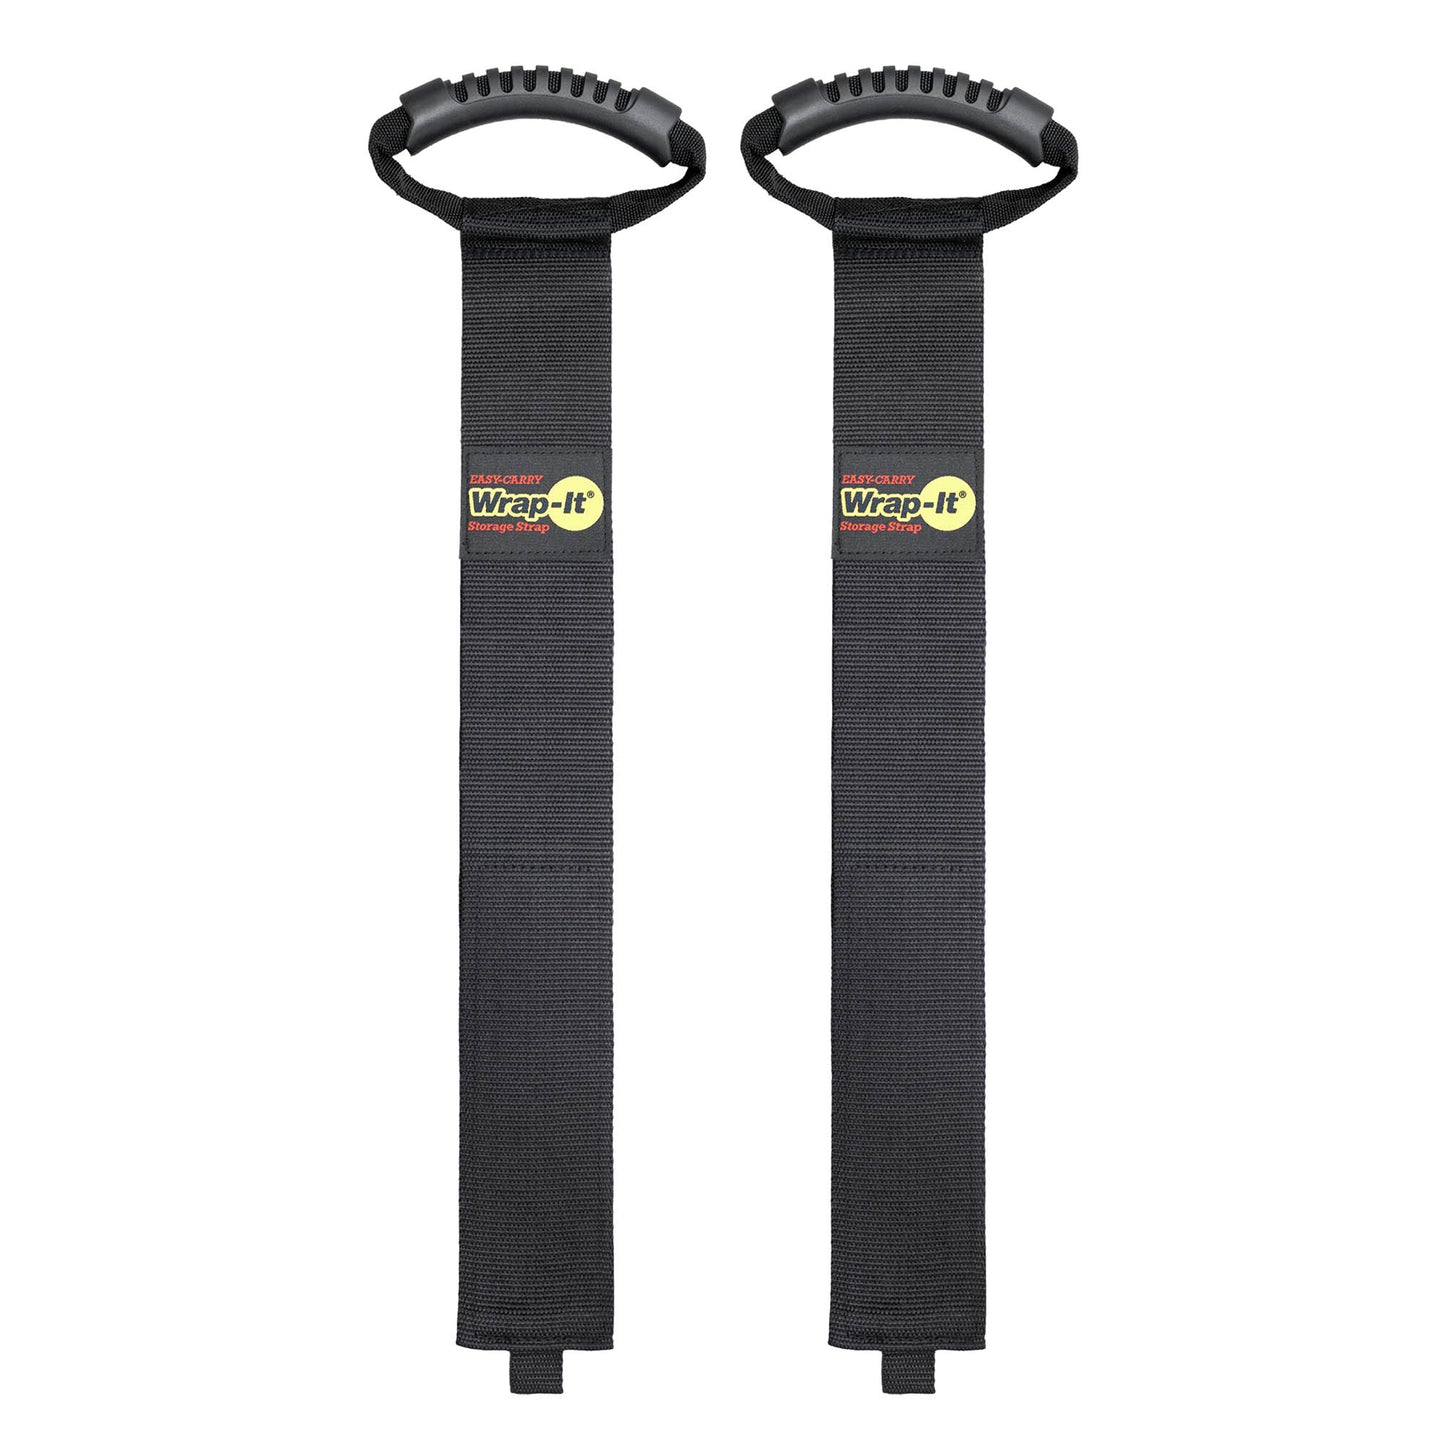 Easy-Carry Storage Straps - 48 in. (2-Pack) - Wrap-It Storage